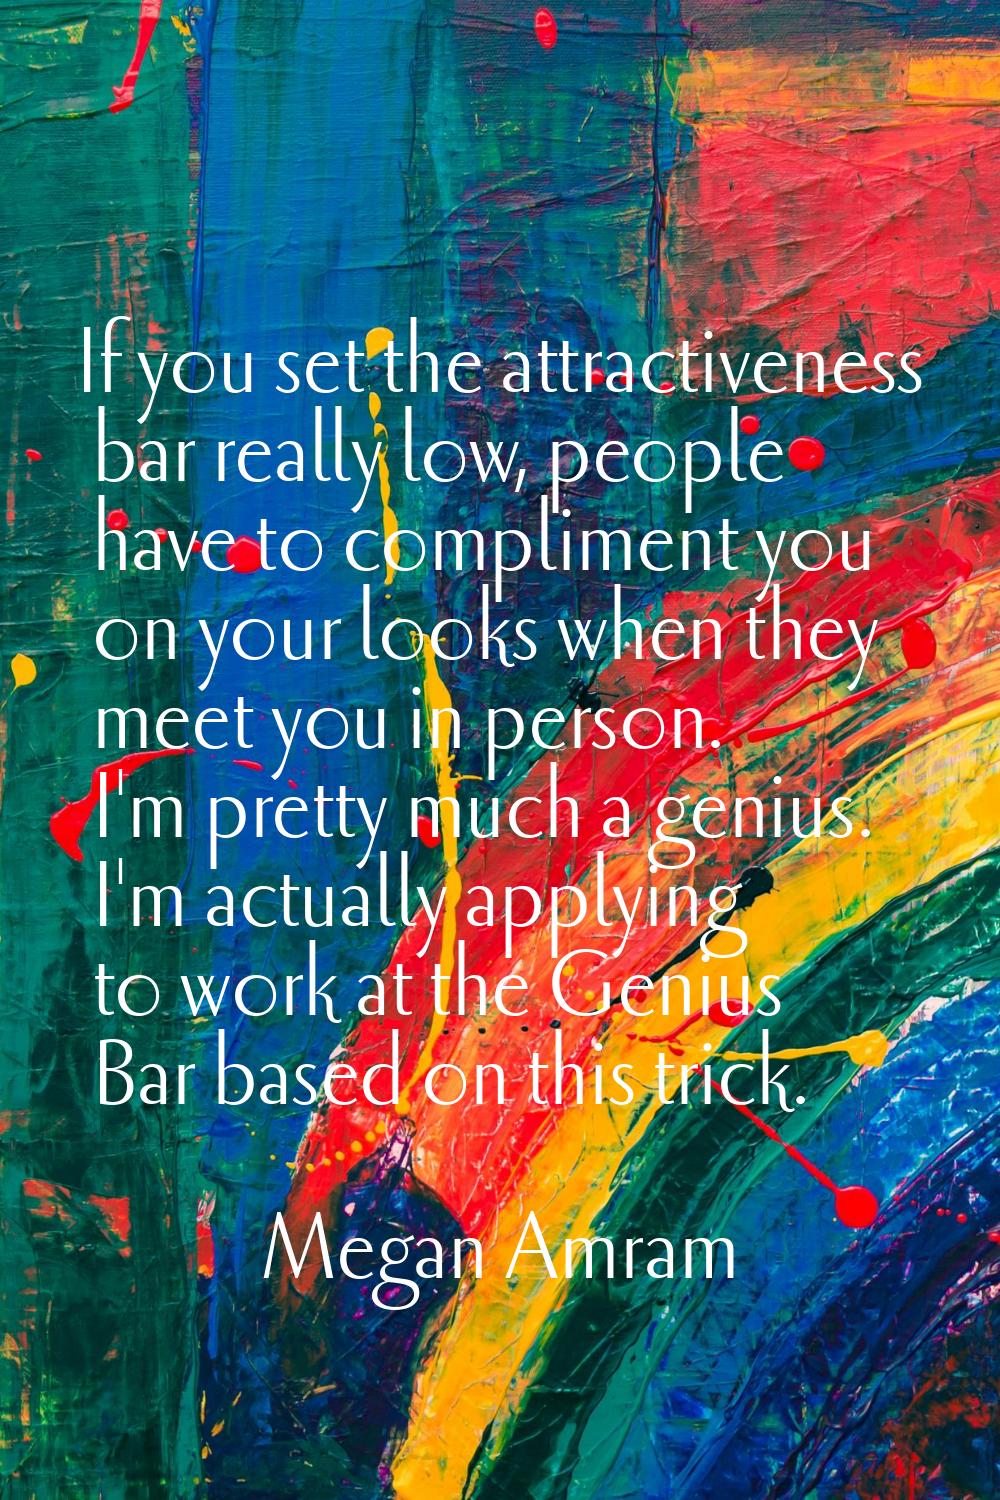 If you set the attractiveness bar really low, people have to compliment you on your looks when they